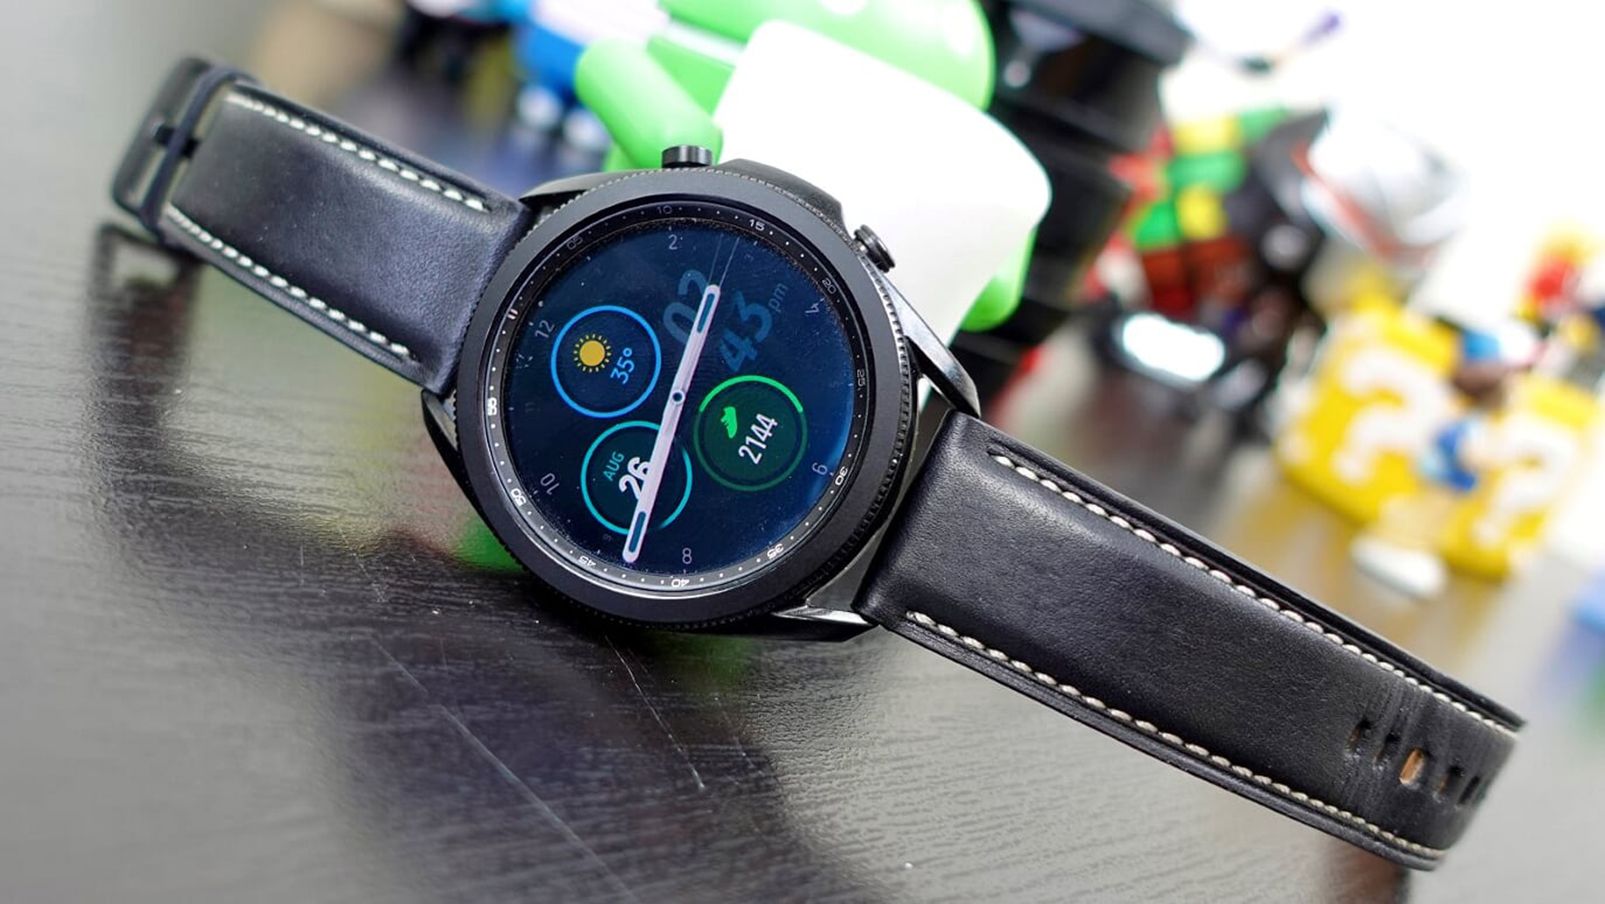 Samsung Watch 3 review | 1.4 inch / comfortable to wear /health and fitness / tracking features